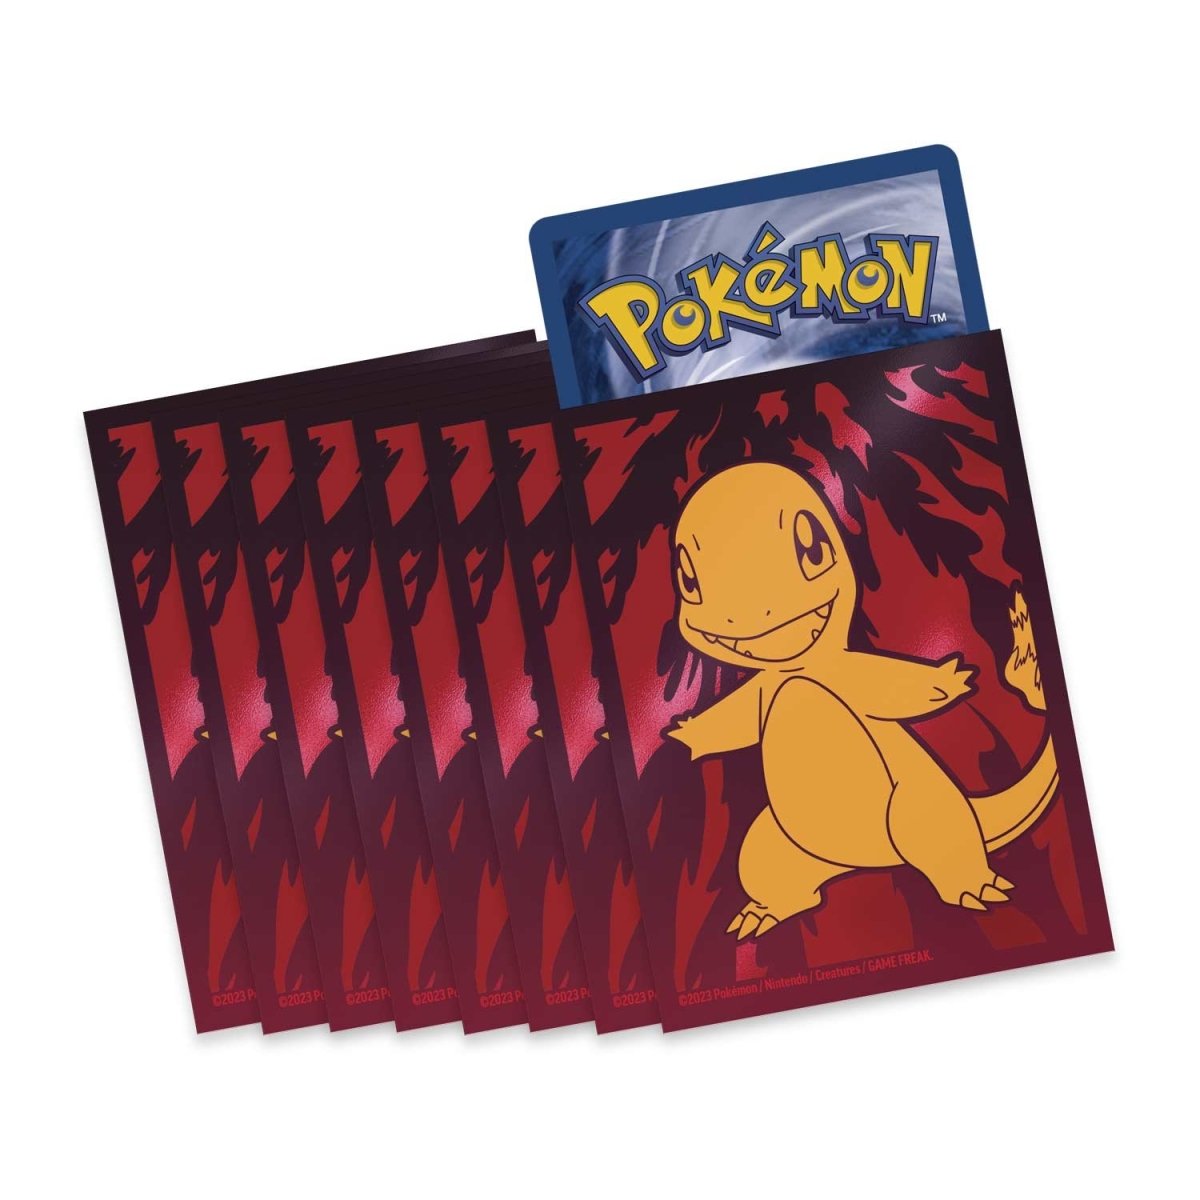 
                  
                    Image of the Pokémon TCG: Scarlet & Violet—Obsidian Flames Pokémon Center Elite Trainer Box. It's a collection of gameplay elements like booster packs, featuring a radiant Charizard ex, Charmander themed card sleeves, and other components. Box contents include 9 booster packs, each containing 10 cards and 1 Basic Energy, plus additional gaming accessories.
                  
                